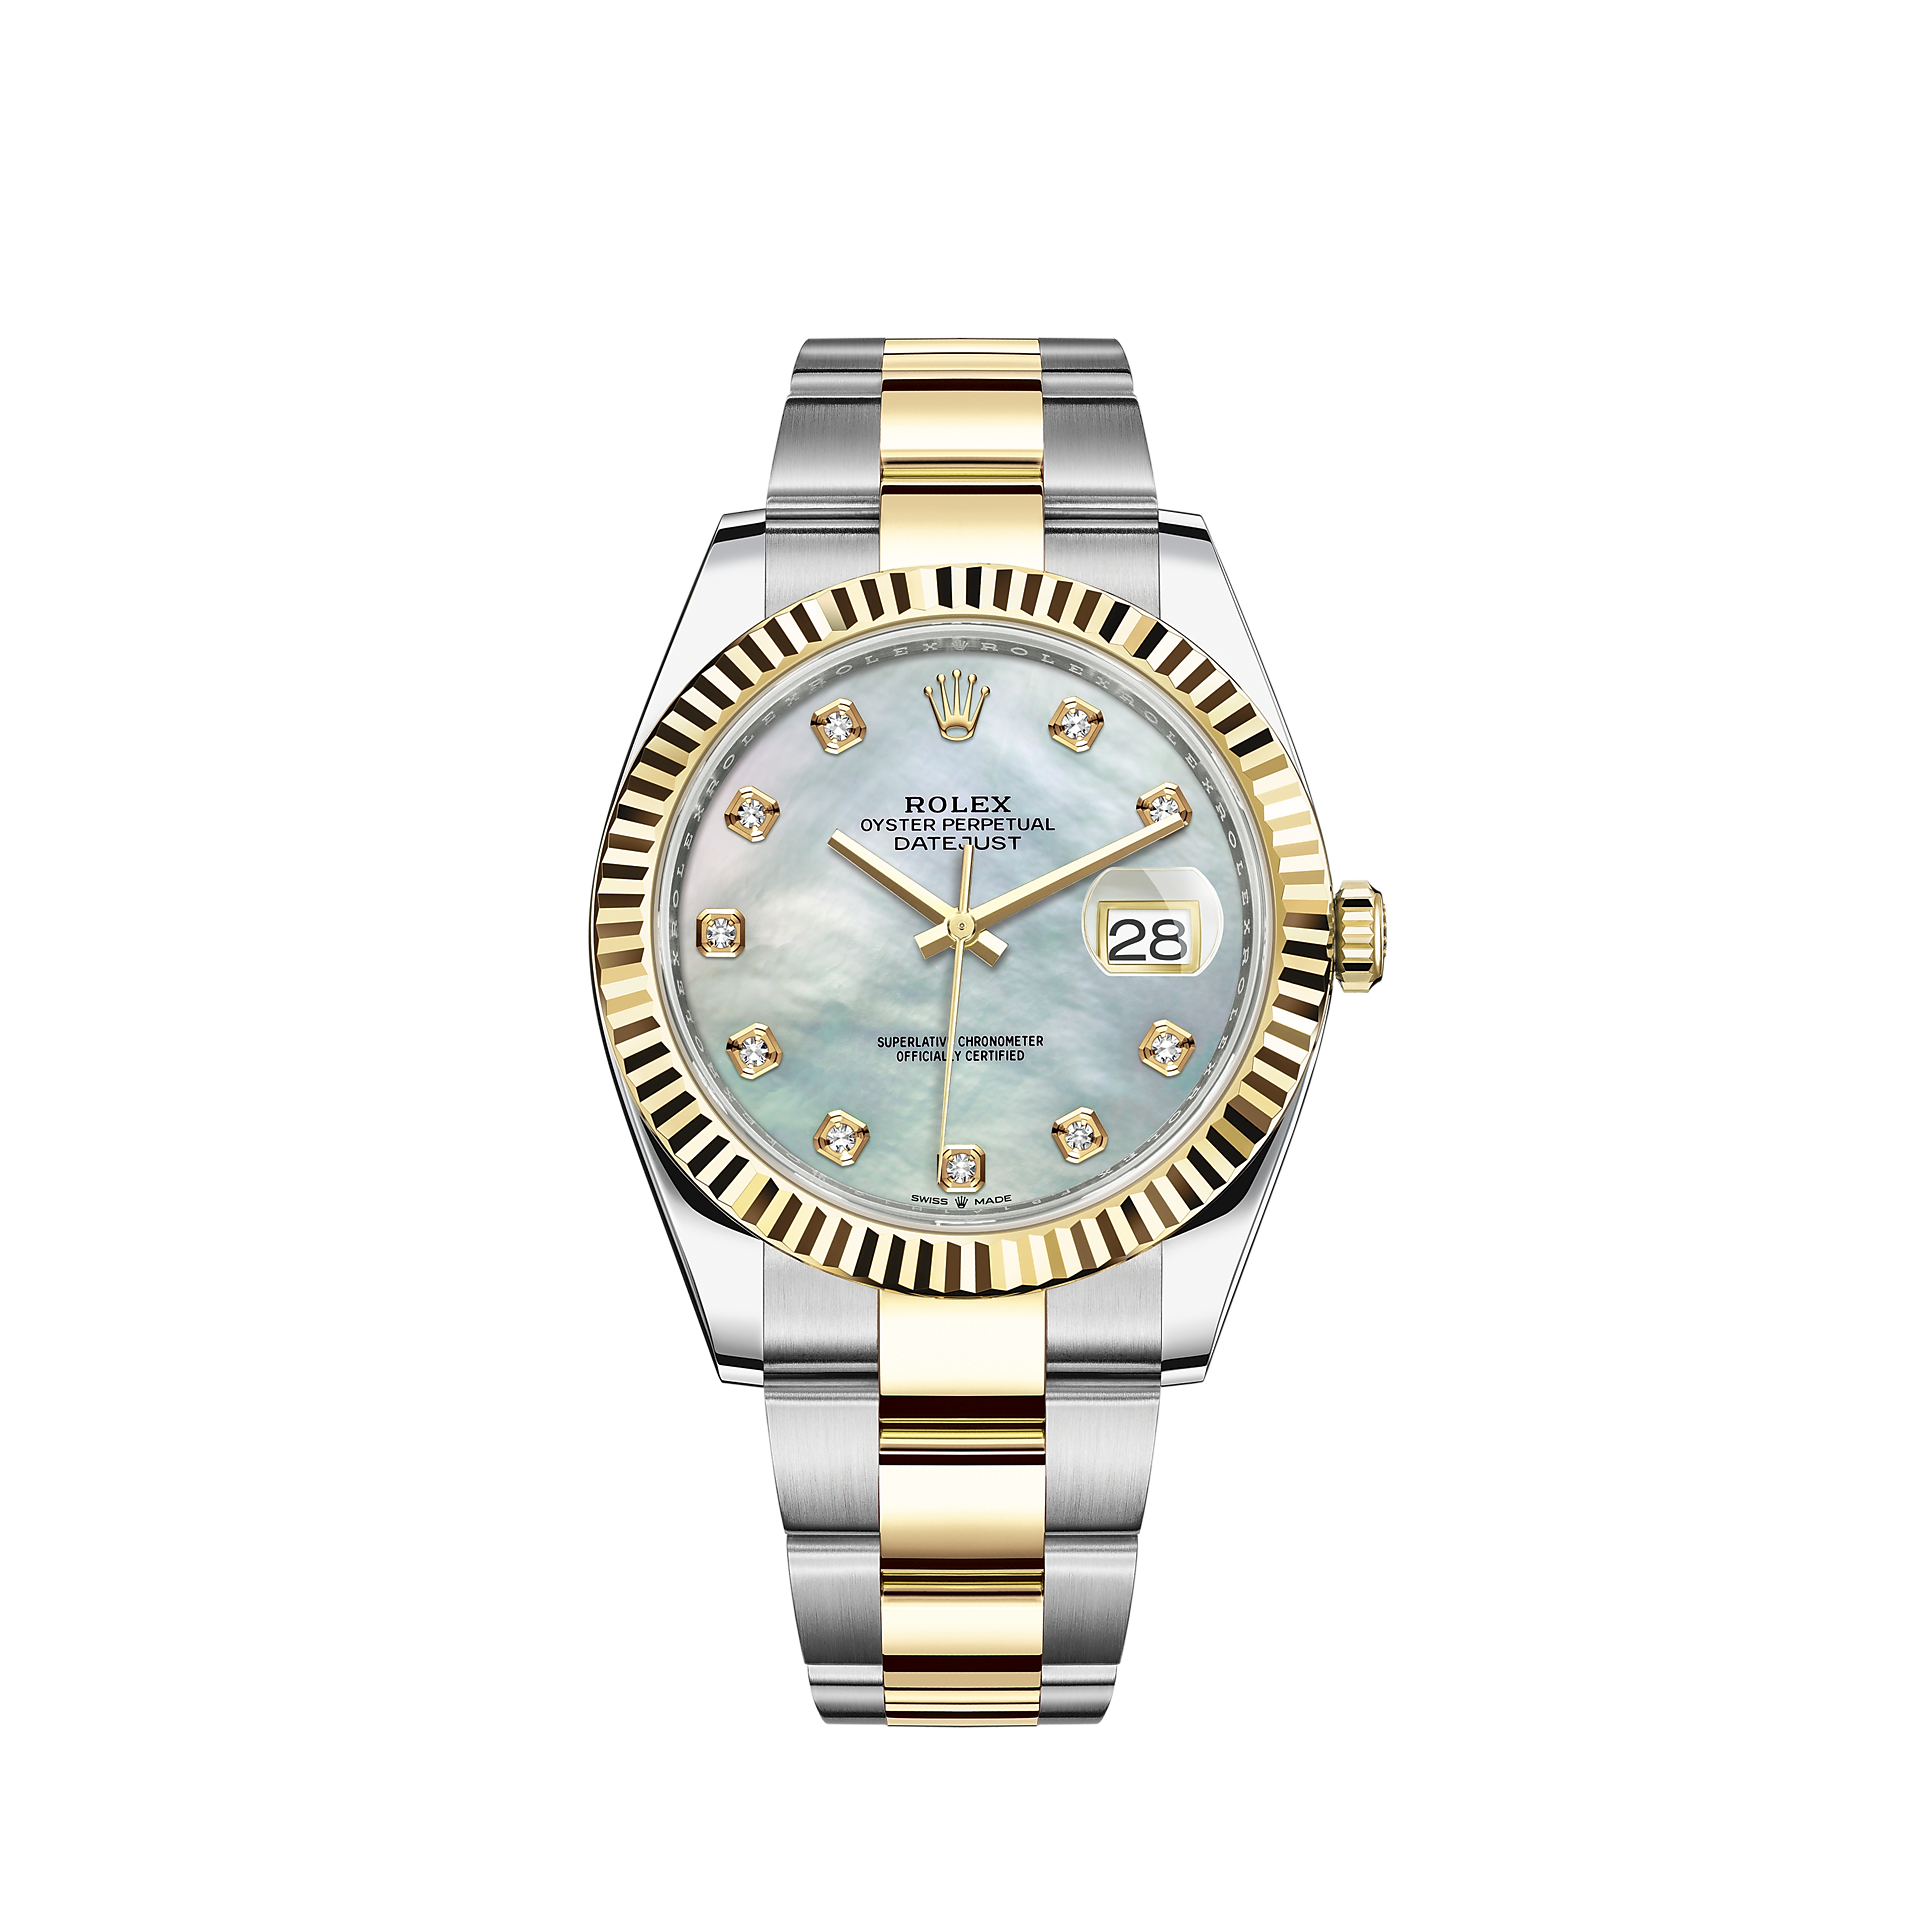 palid Pelagic Manuscris  Rolex Datejust 41 watch: Oystersteel and yellow gold - M126333-0017